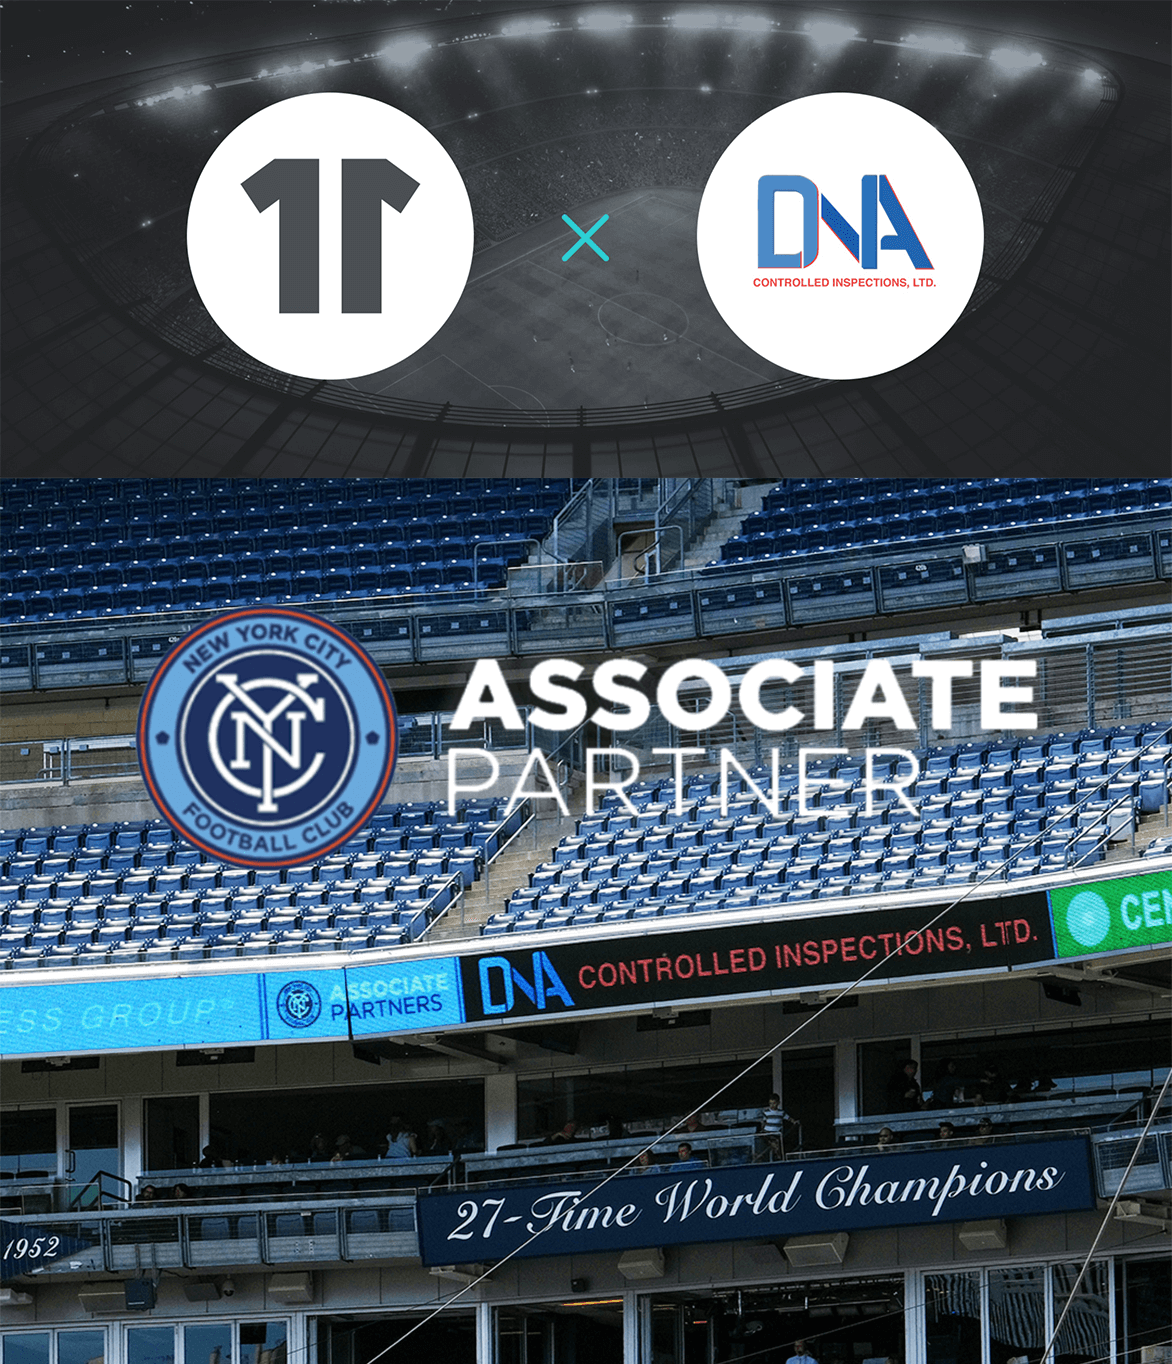 Media And Press. News Articles, Post Publications, Awards and Promotions. Builds New Associate Partnership with NYCFC.